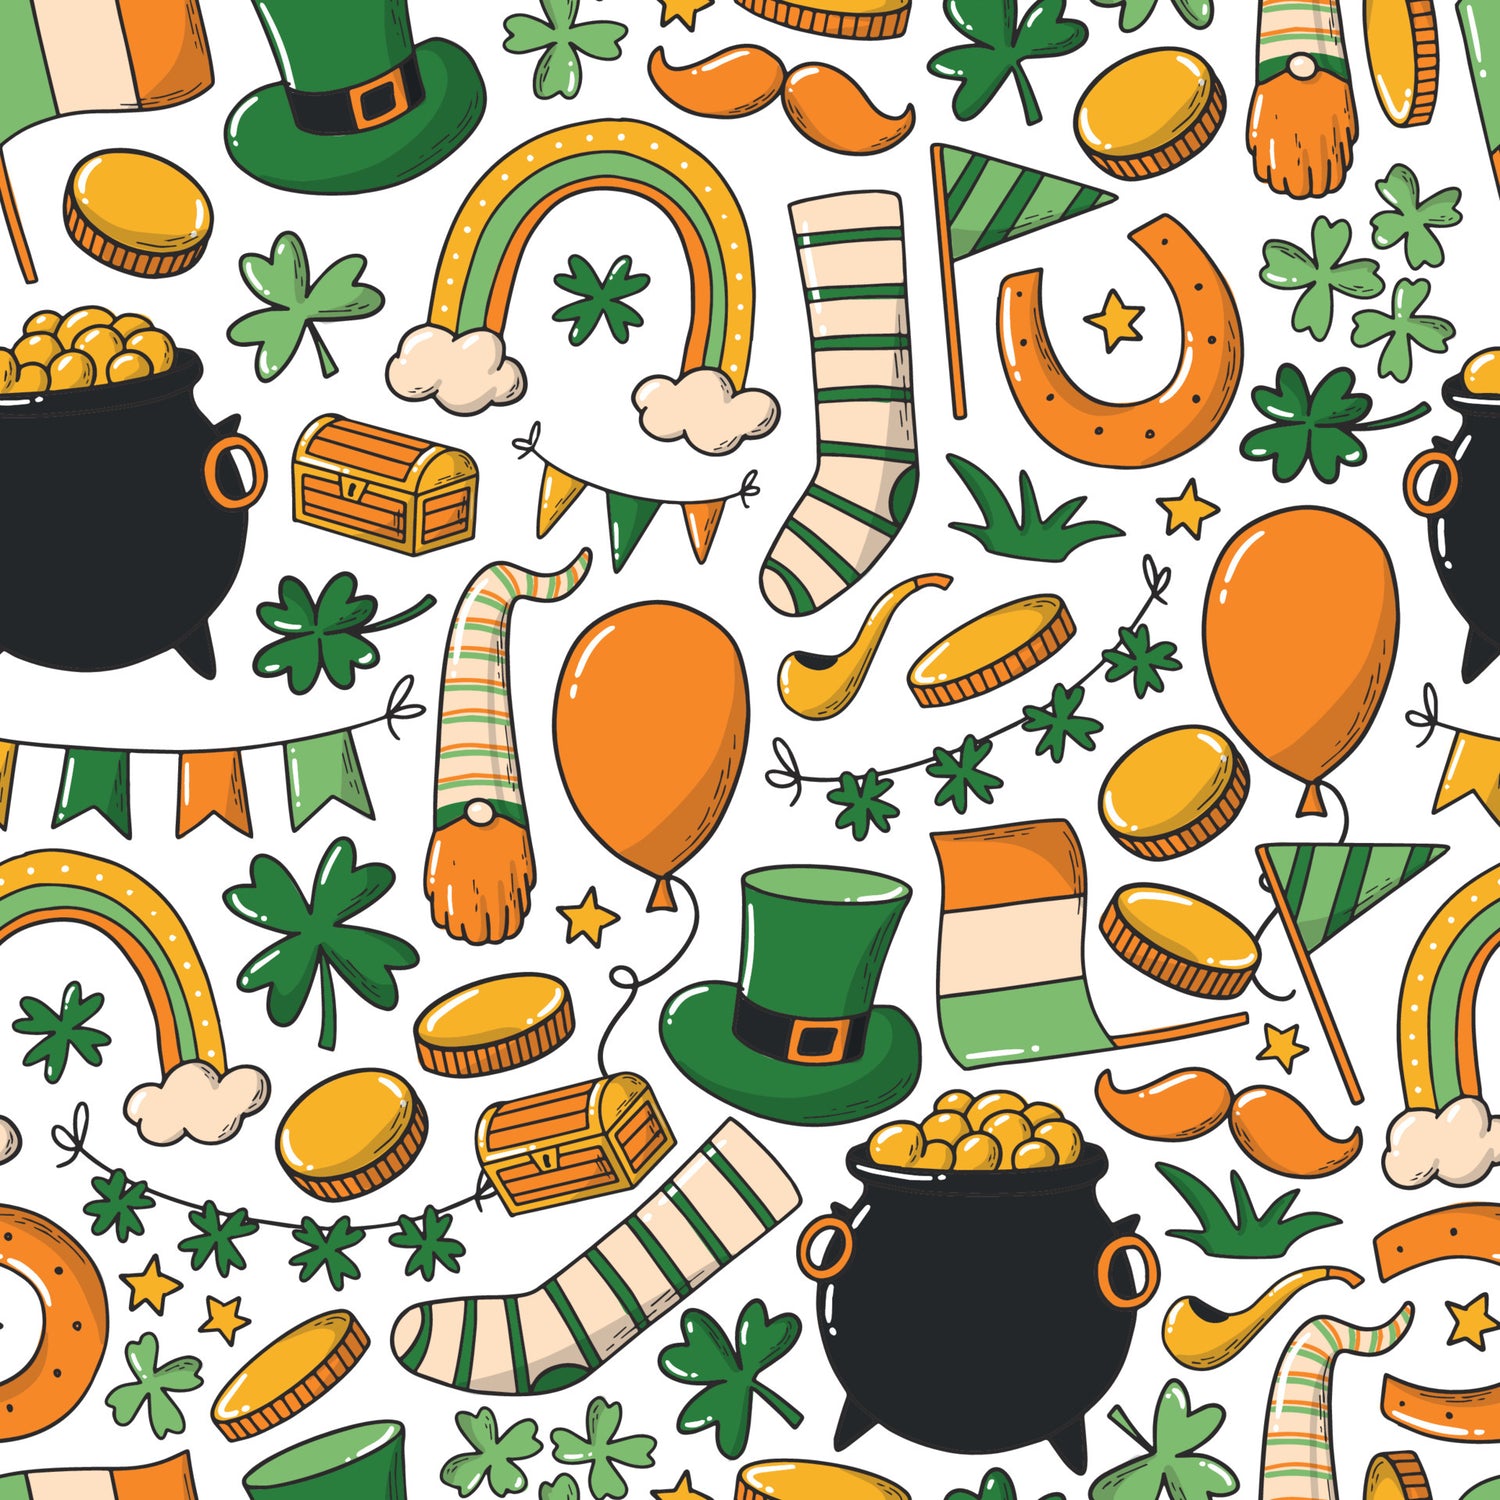 St. Patrick’s Day Items